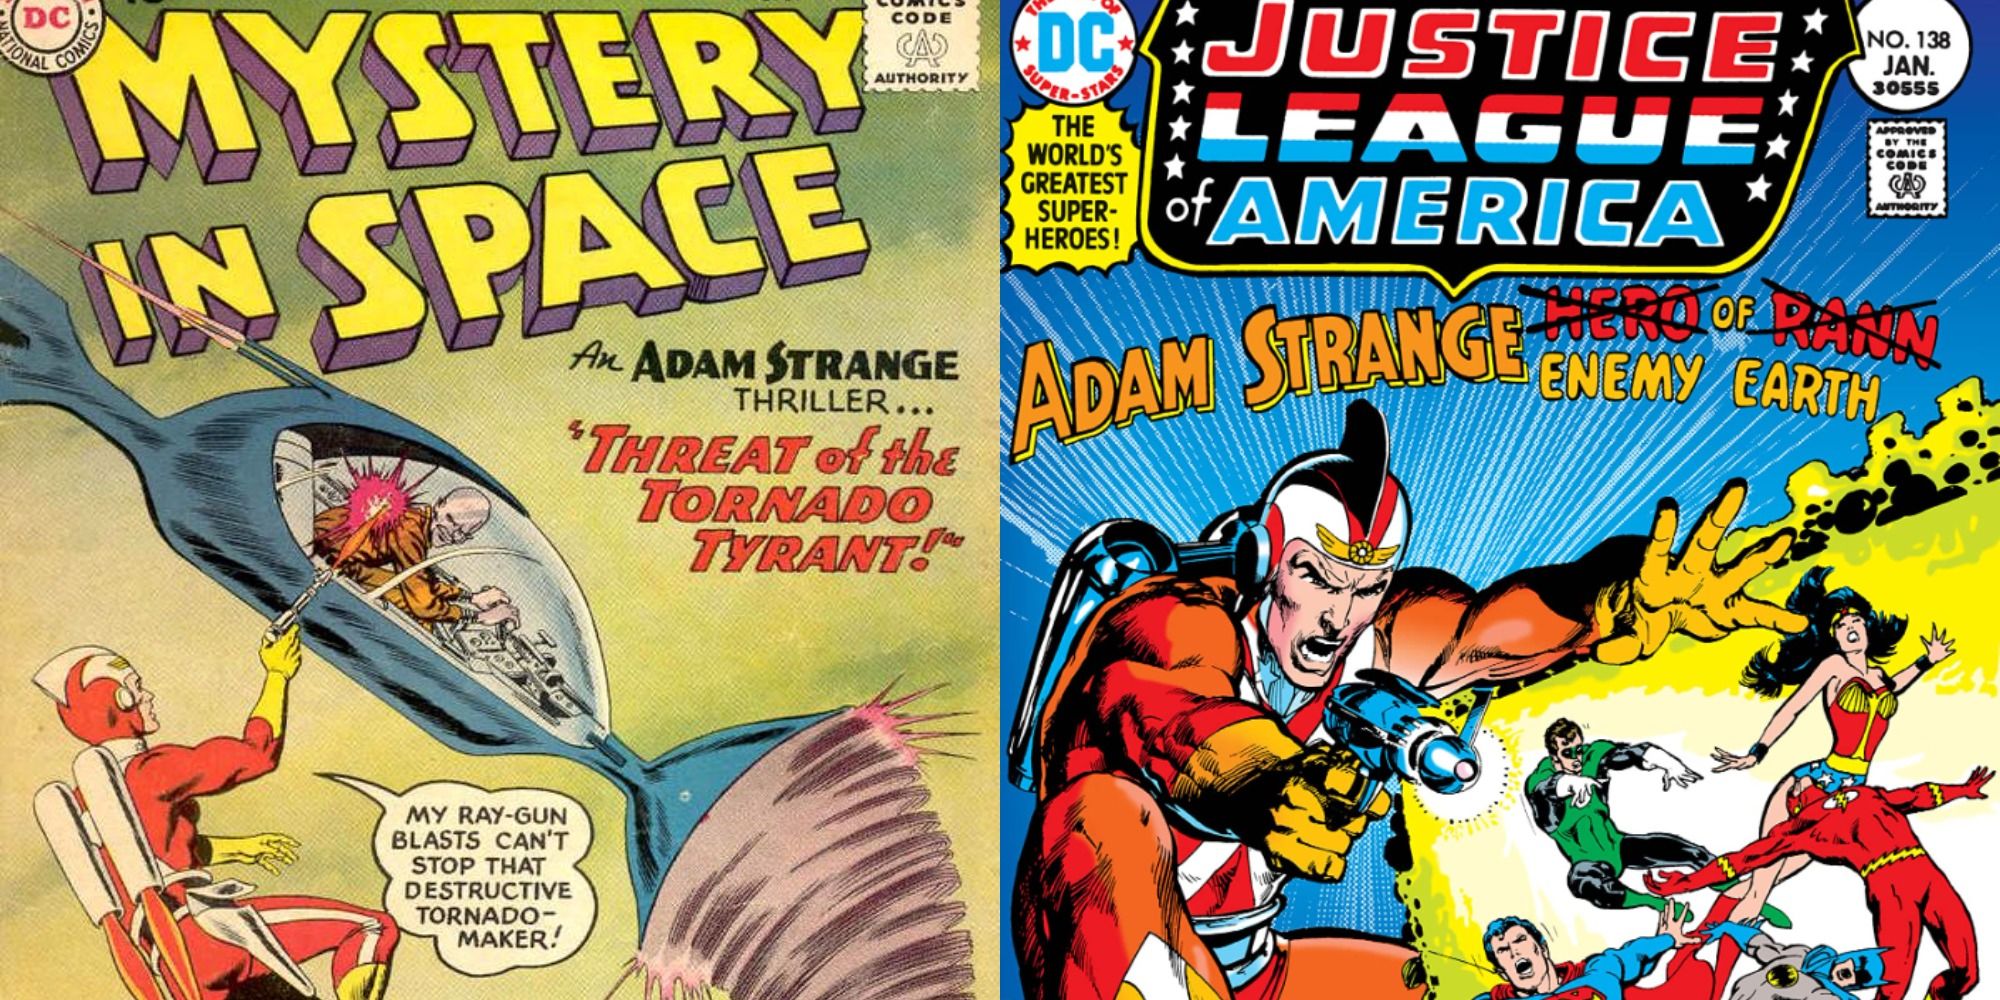 Split image showing the covers of Mystery in Space #61 and Justice League of America #138